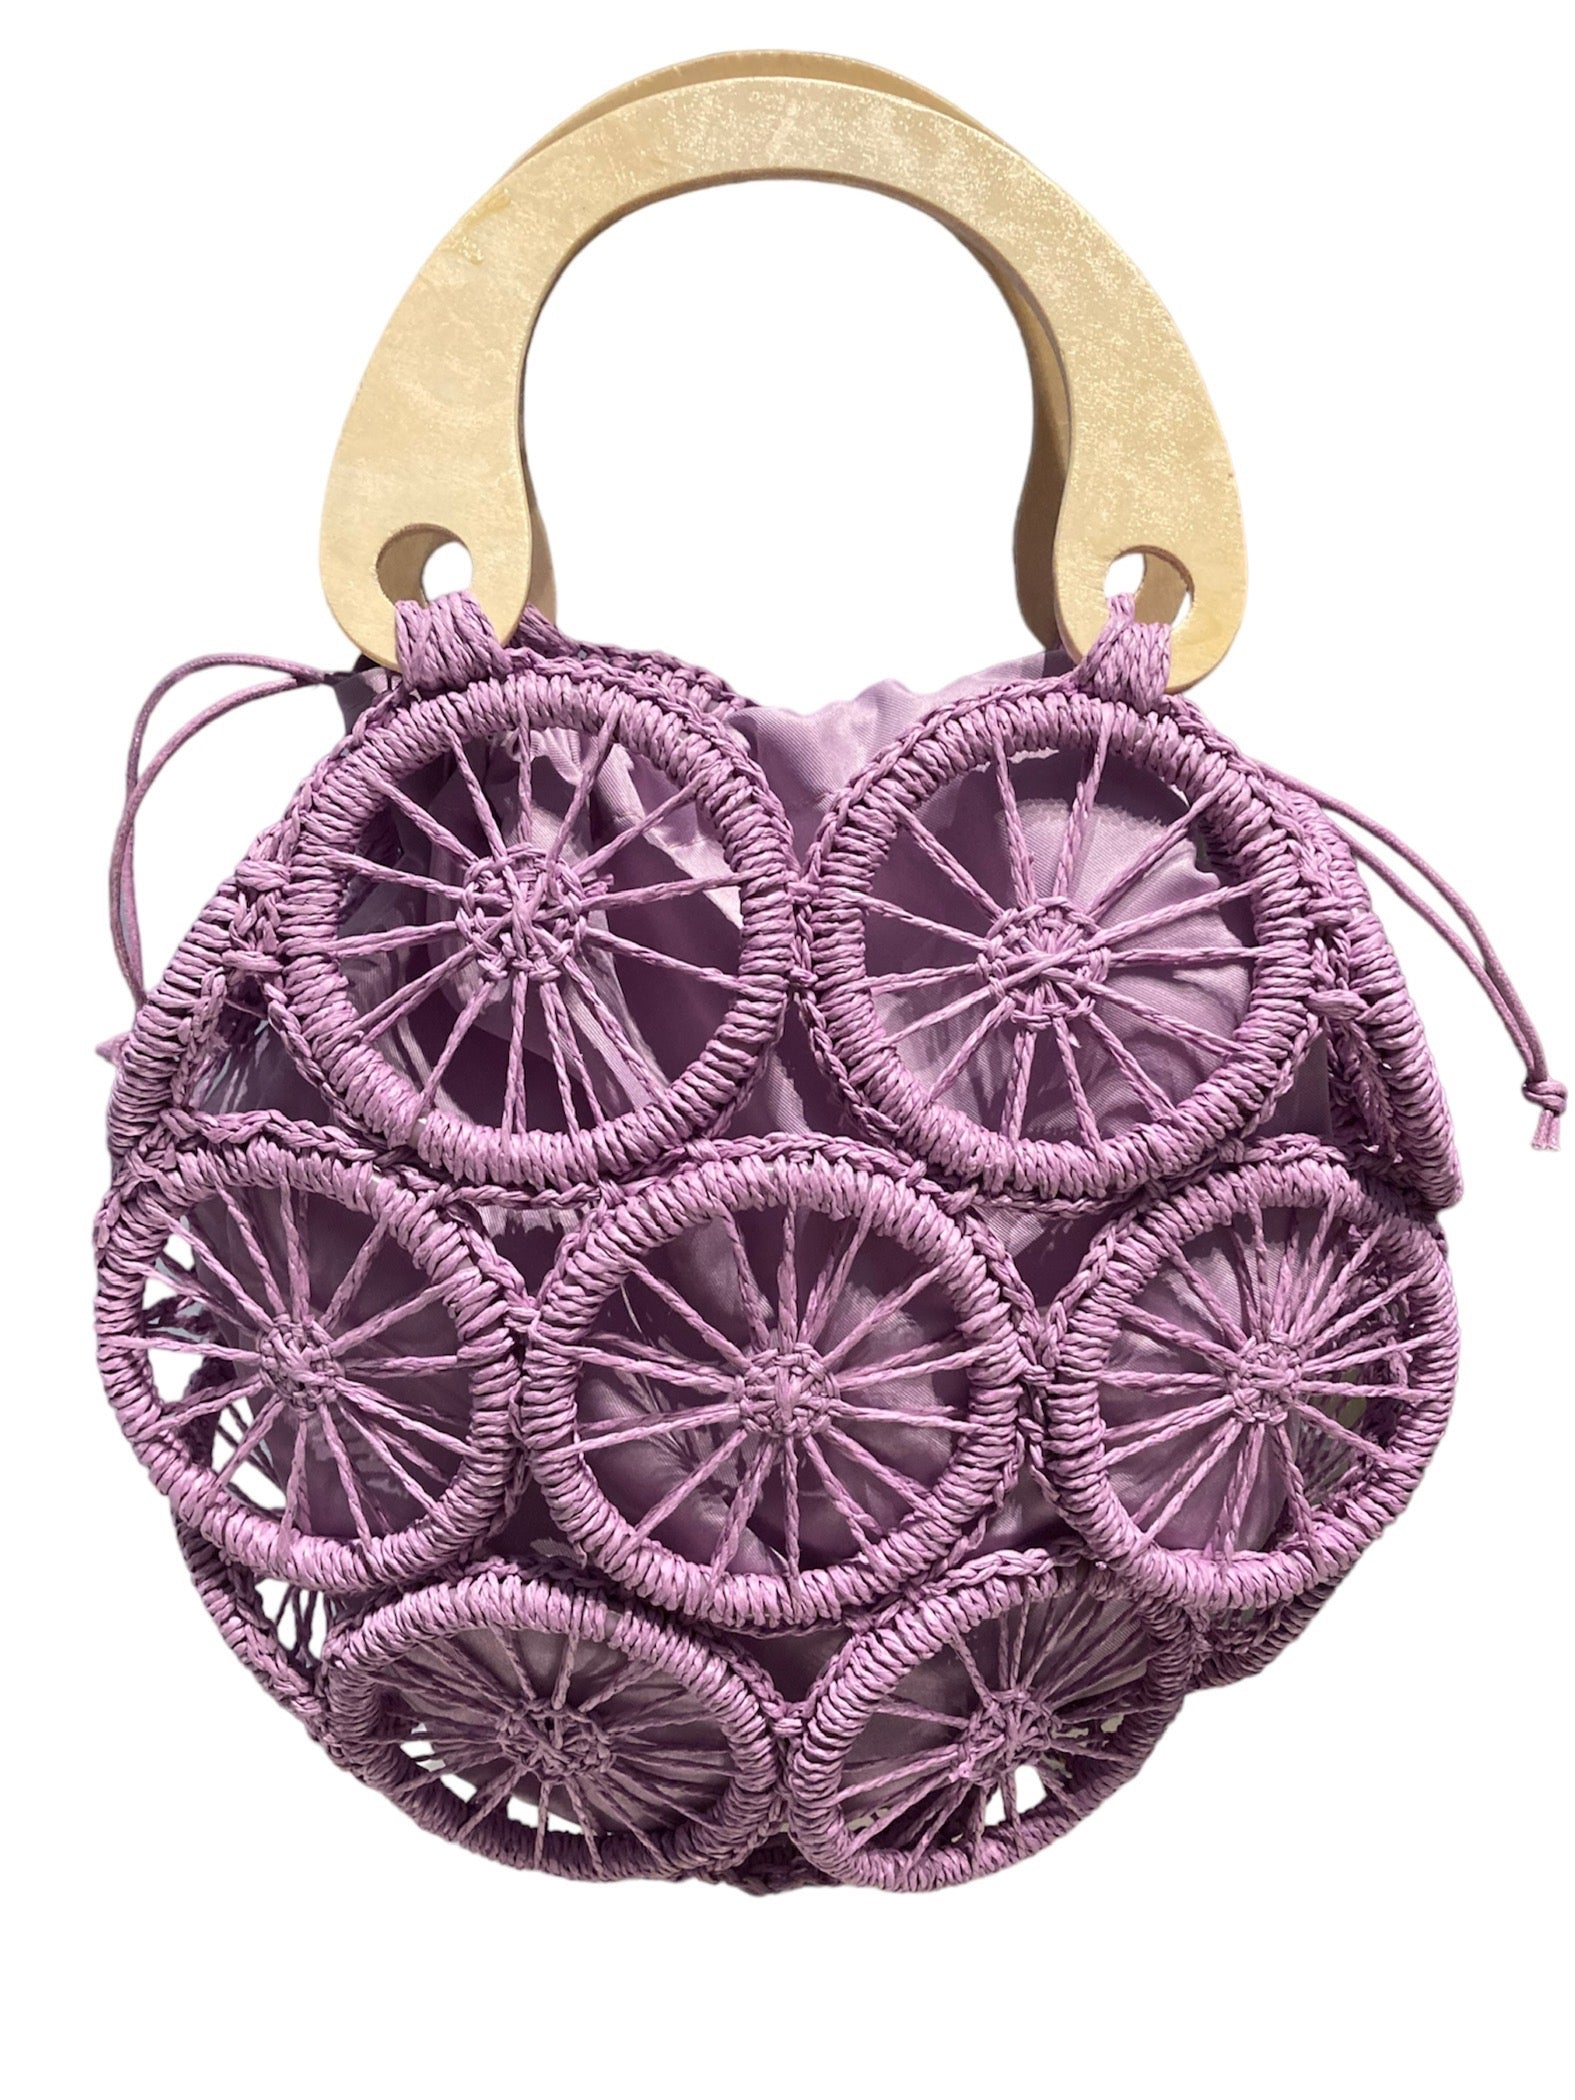 Crochet Ring Bag with Inner Pouch - DAF&DREAM